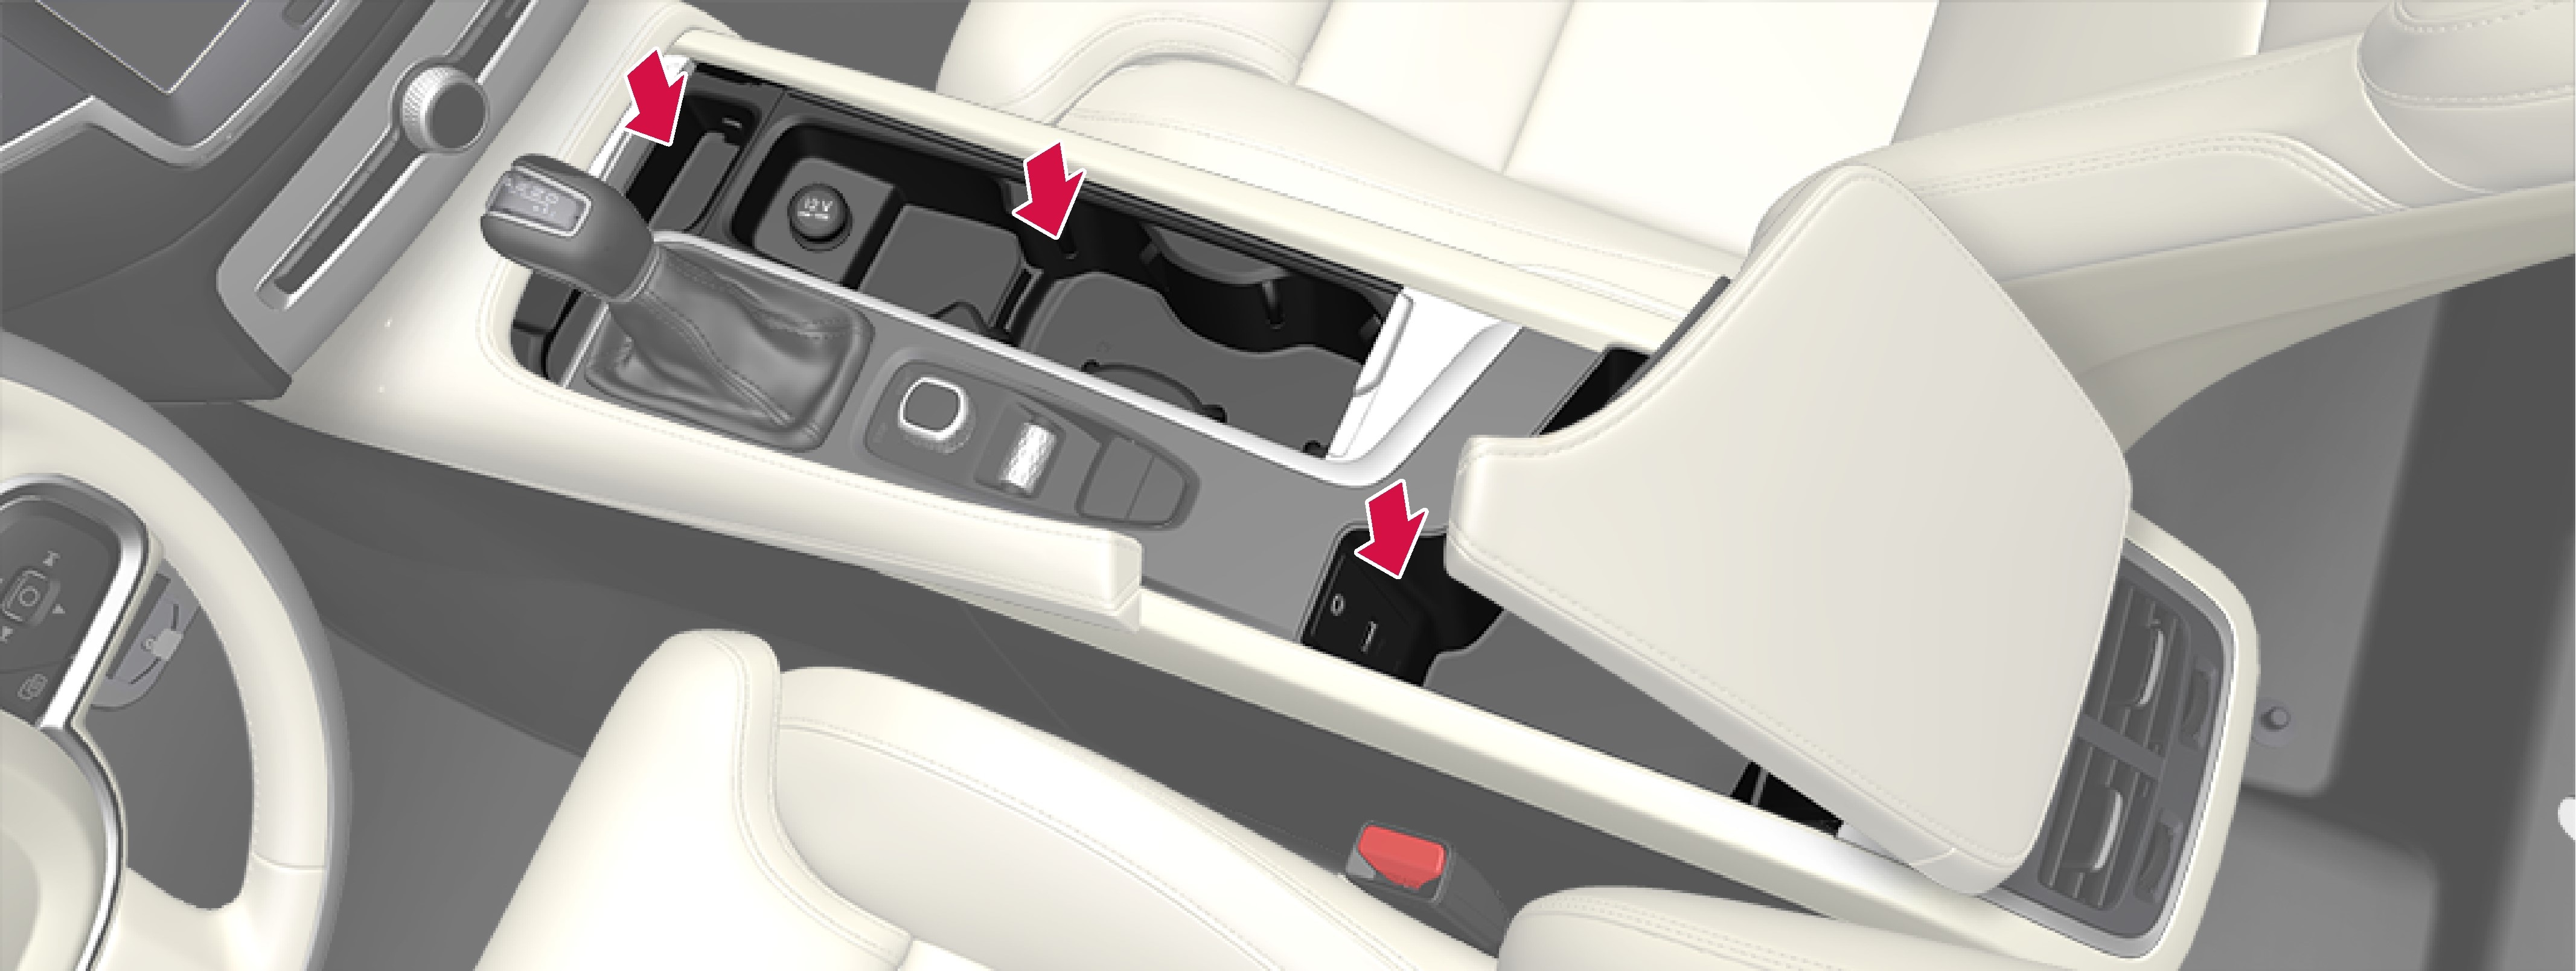 Storage spaces with cup holder, ashtray, electrical socket and cigarette lighter as well as an AUX/USB socket in the tunnel console.